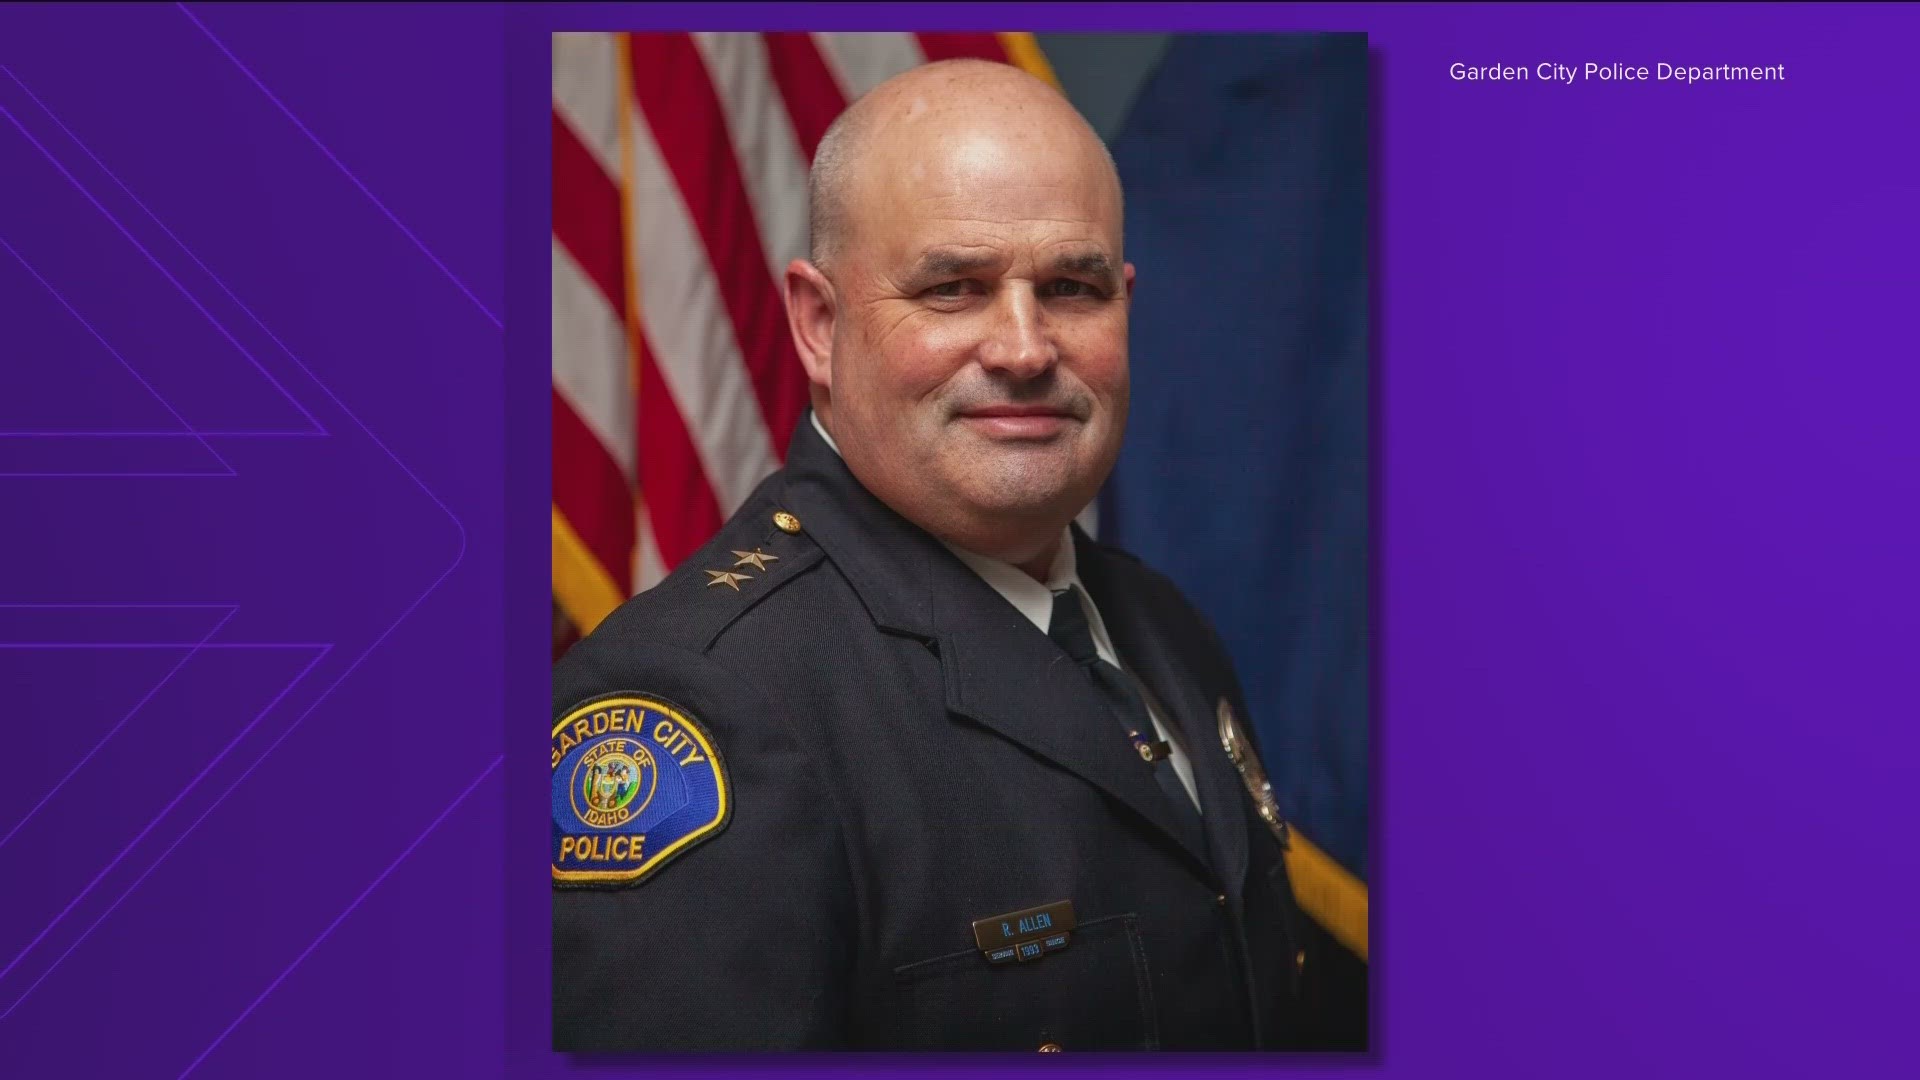 Garden City Police Chief Rick Allen announced his intent to retire after 30 years of service, effective July 1.